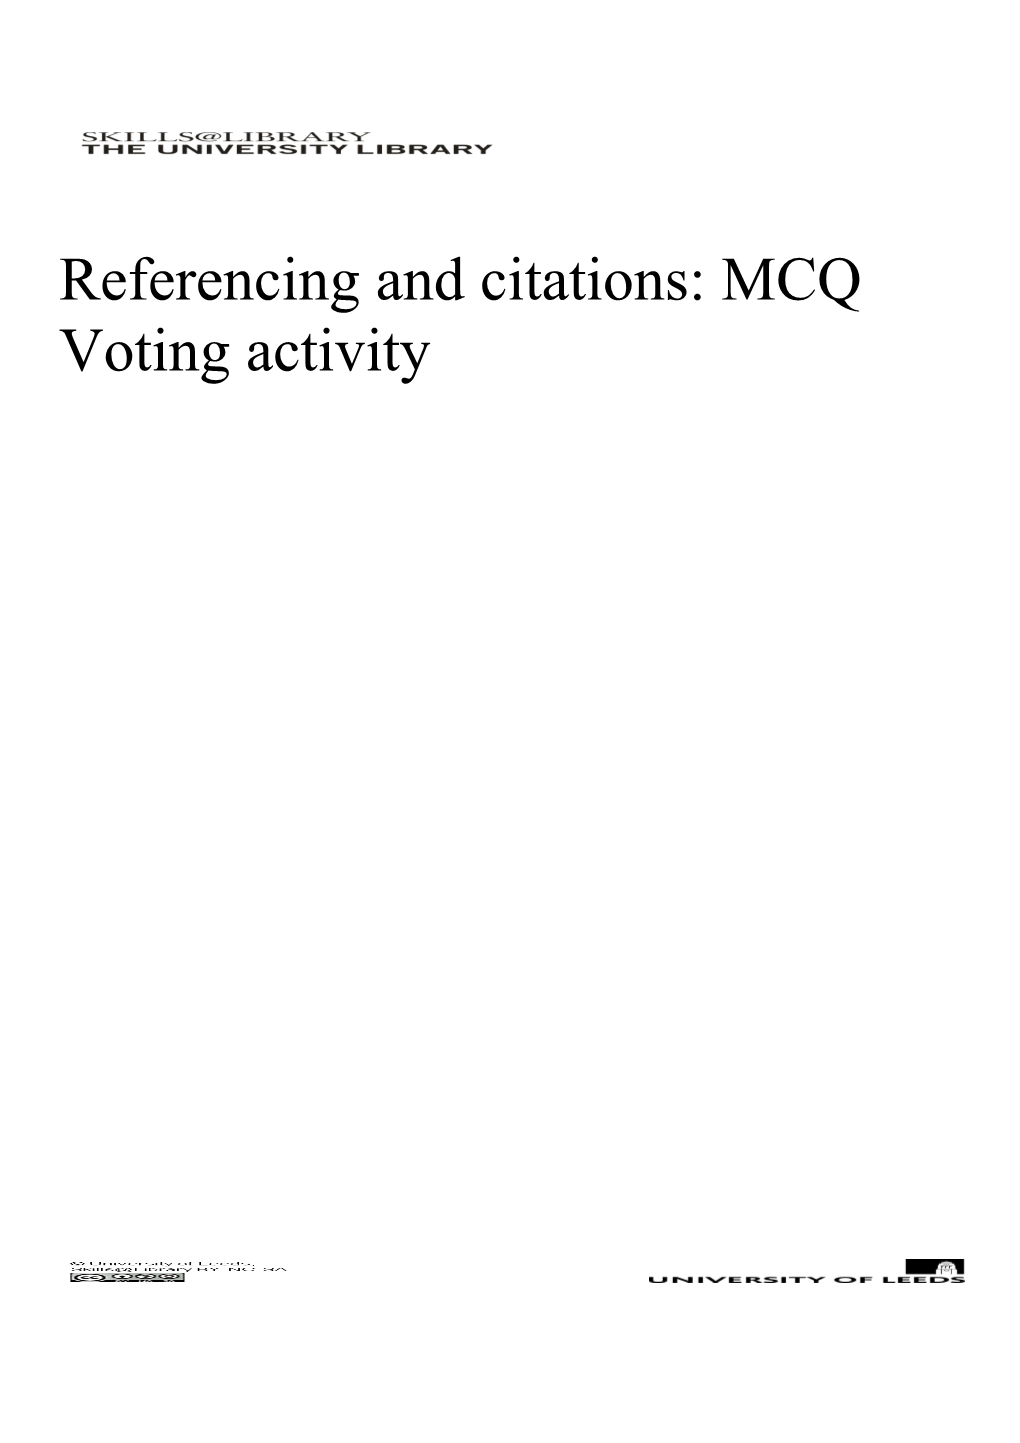 Referencing and Citations: MCQ Voting Activity